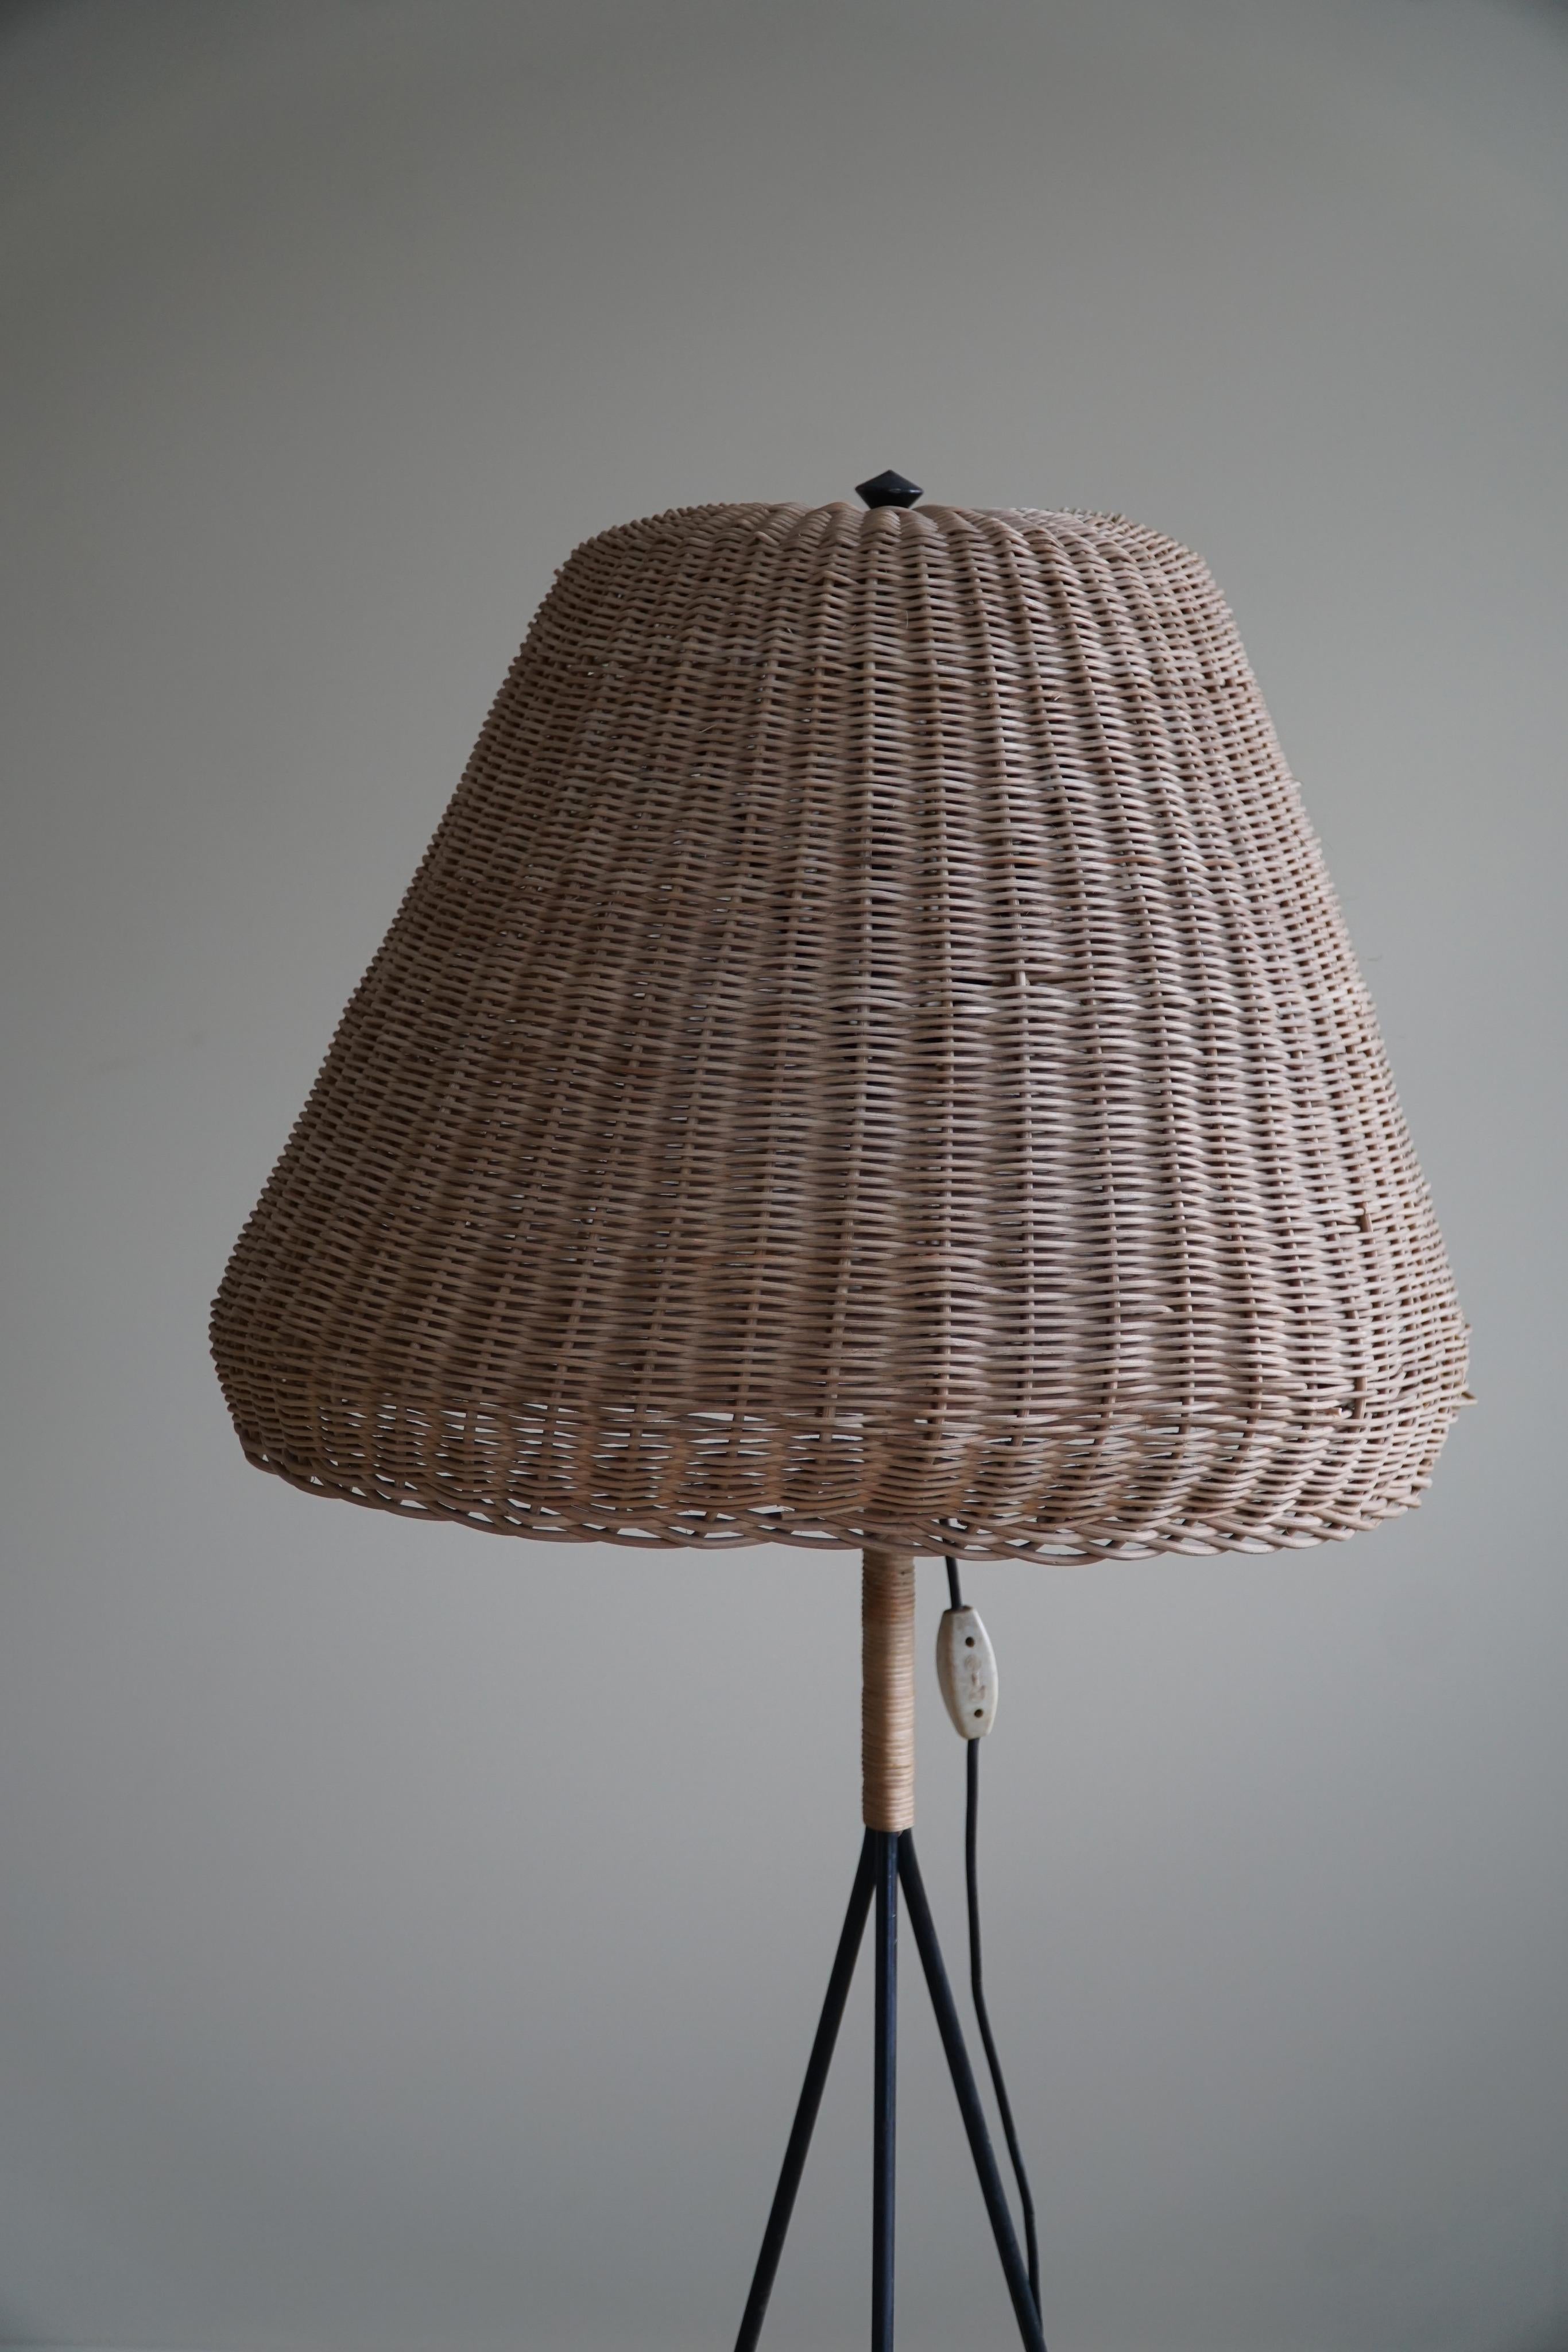 French Modern, Floor Lamp in Rattan and Steel, Mid Century, 1960s For Sale 5